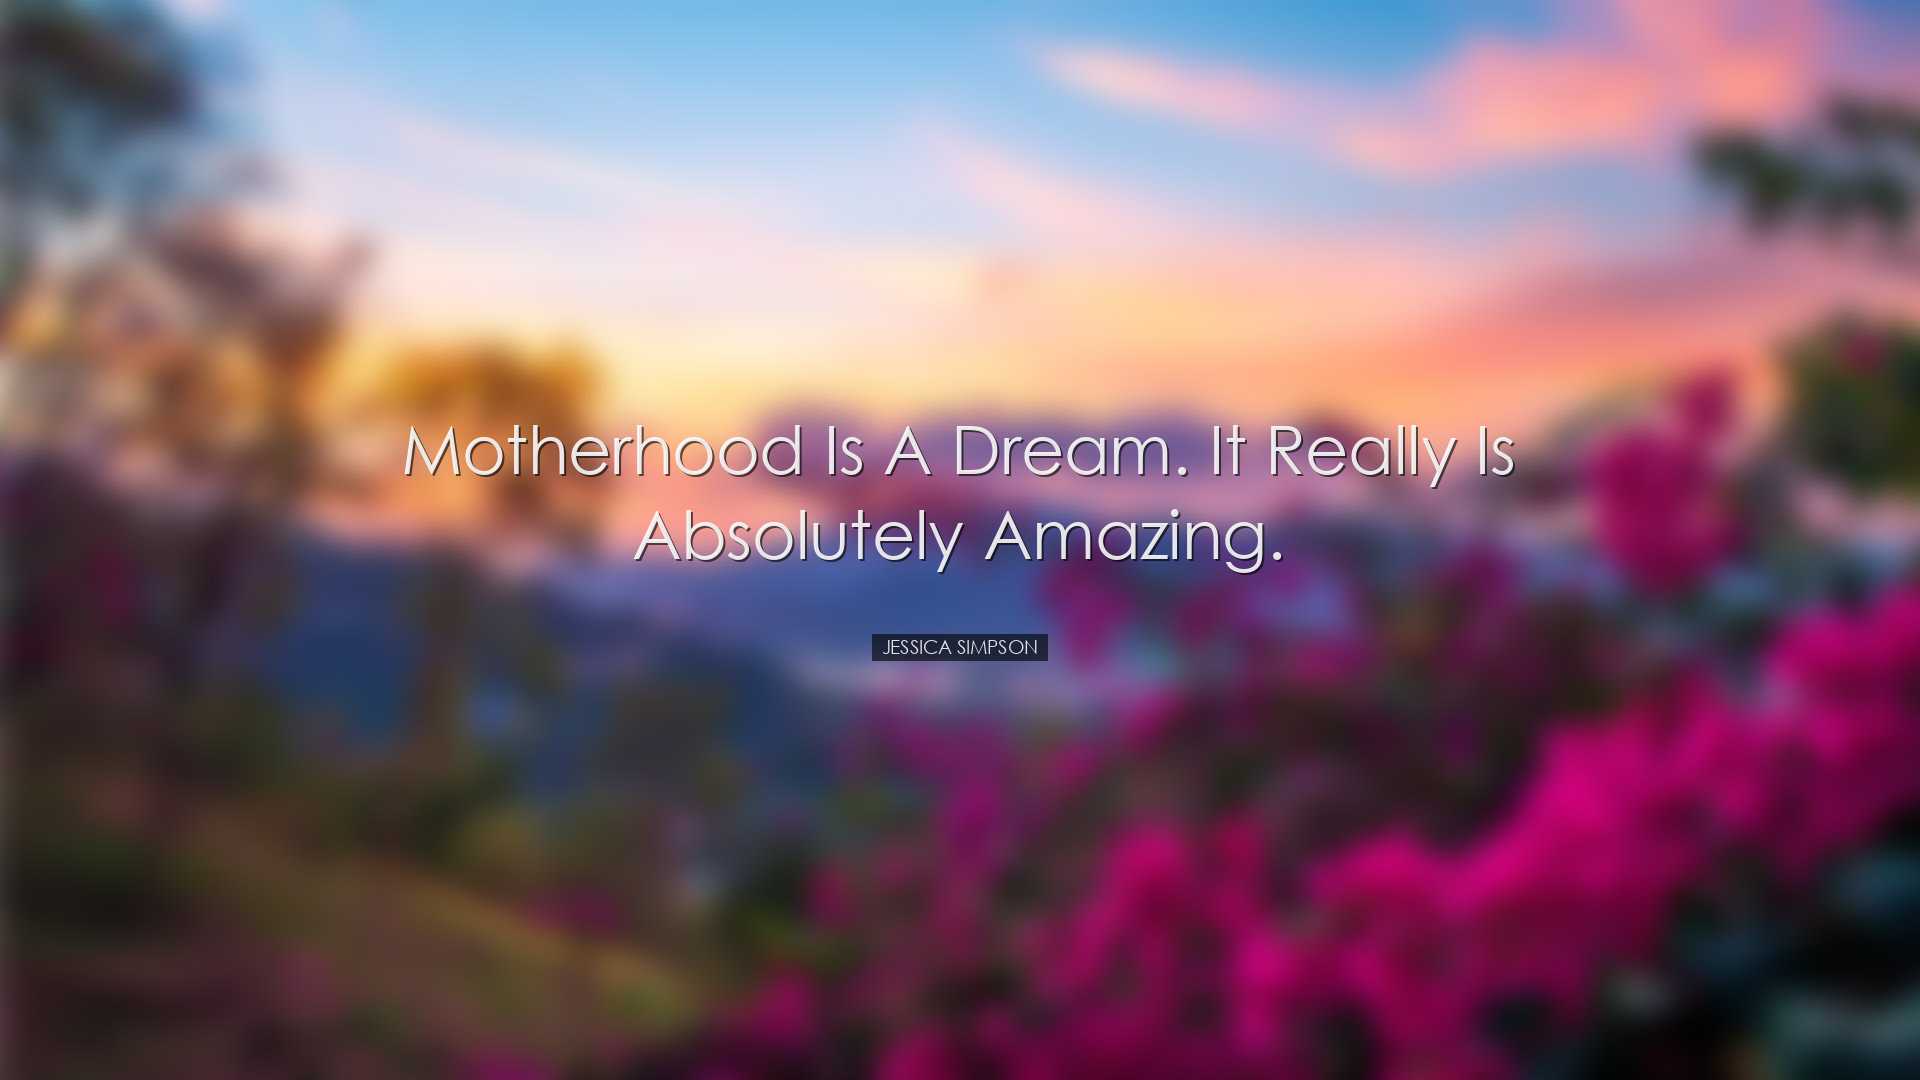 Motherhood is a dream. It really is absolutely amazing. - Jessica